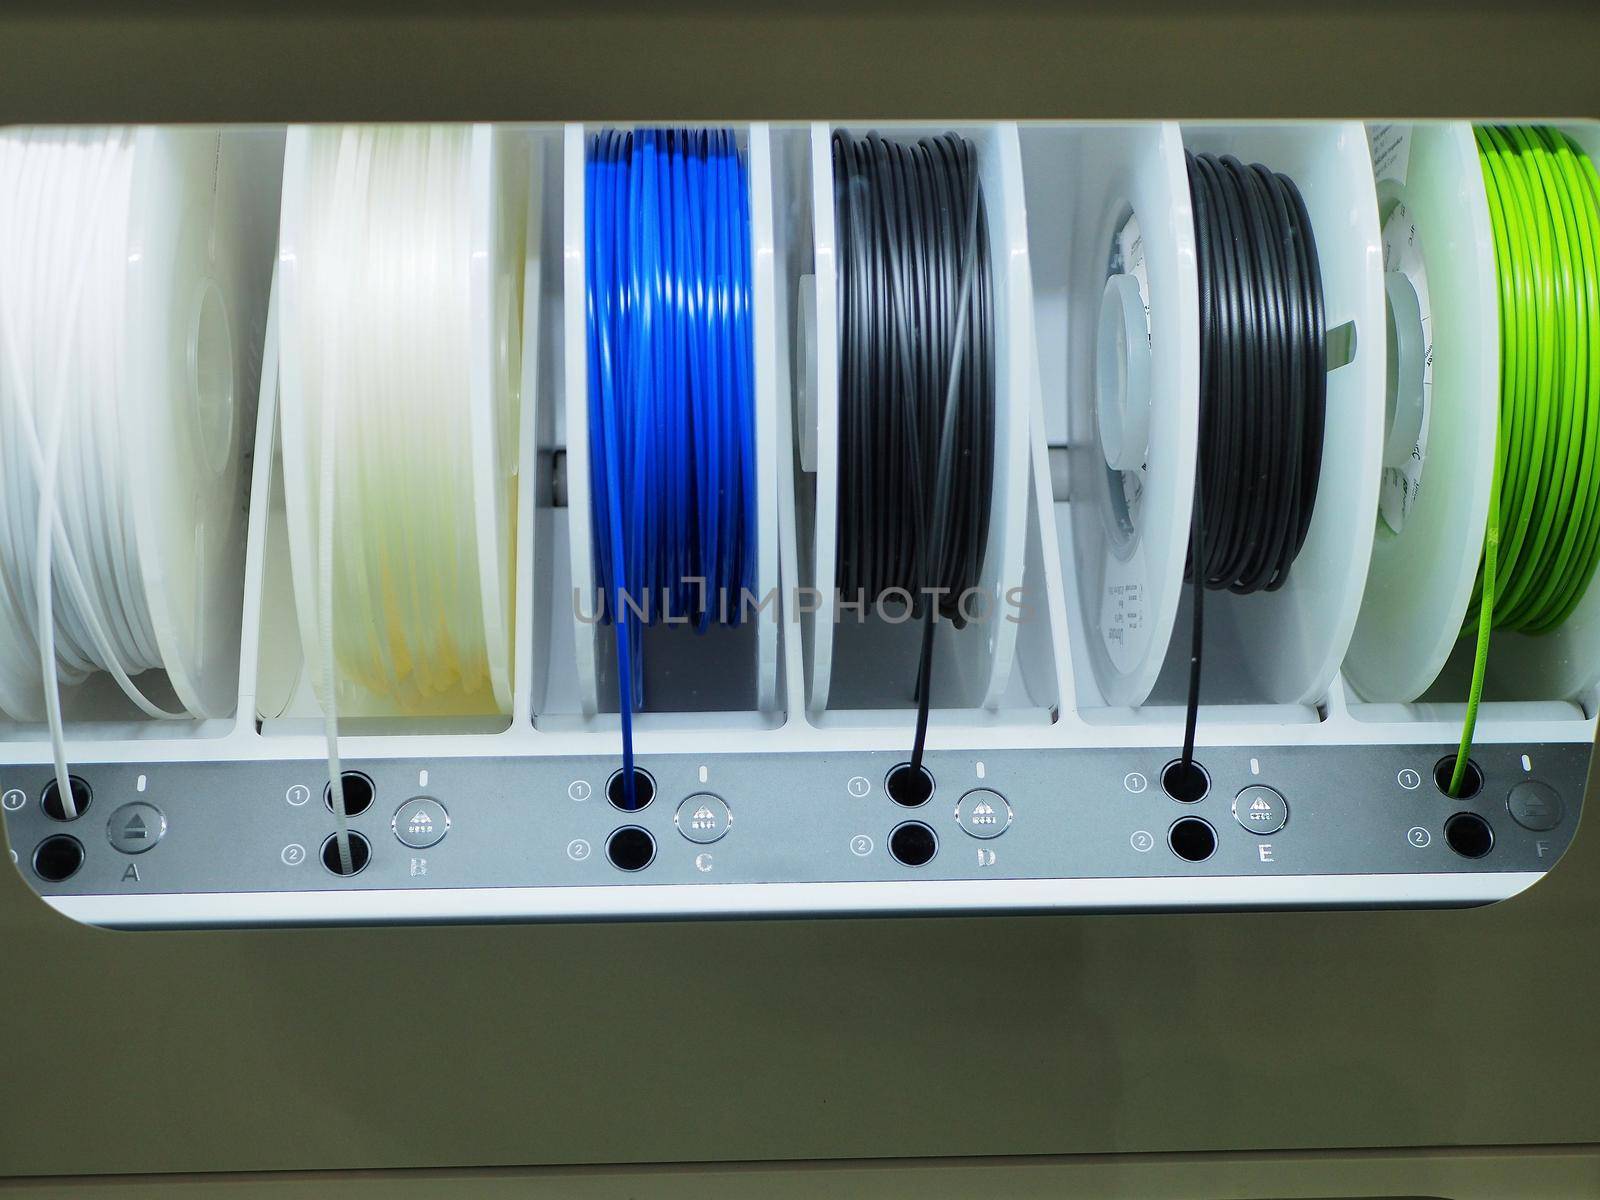 Spools of multicolor thermoplastic filament installed on 3d printer
Turin Italy February 12 2020